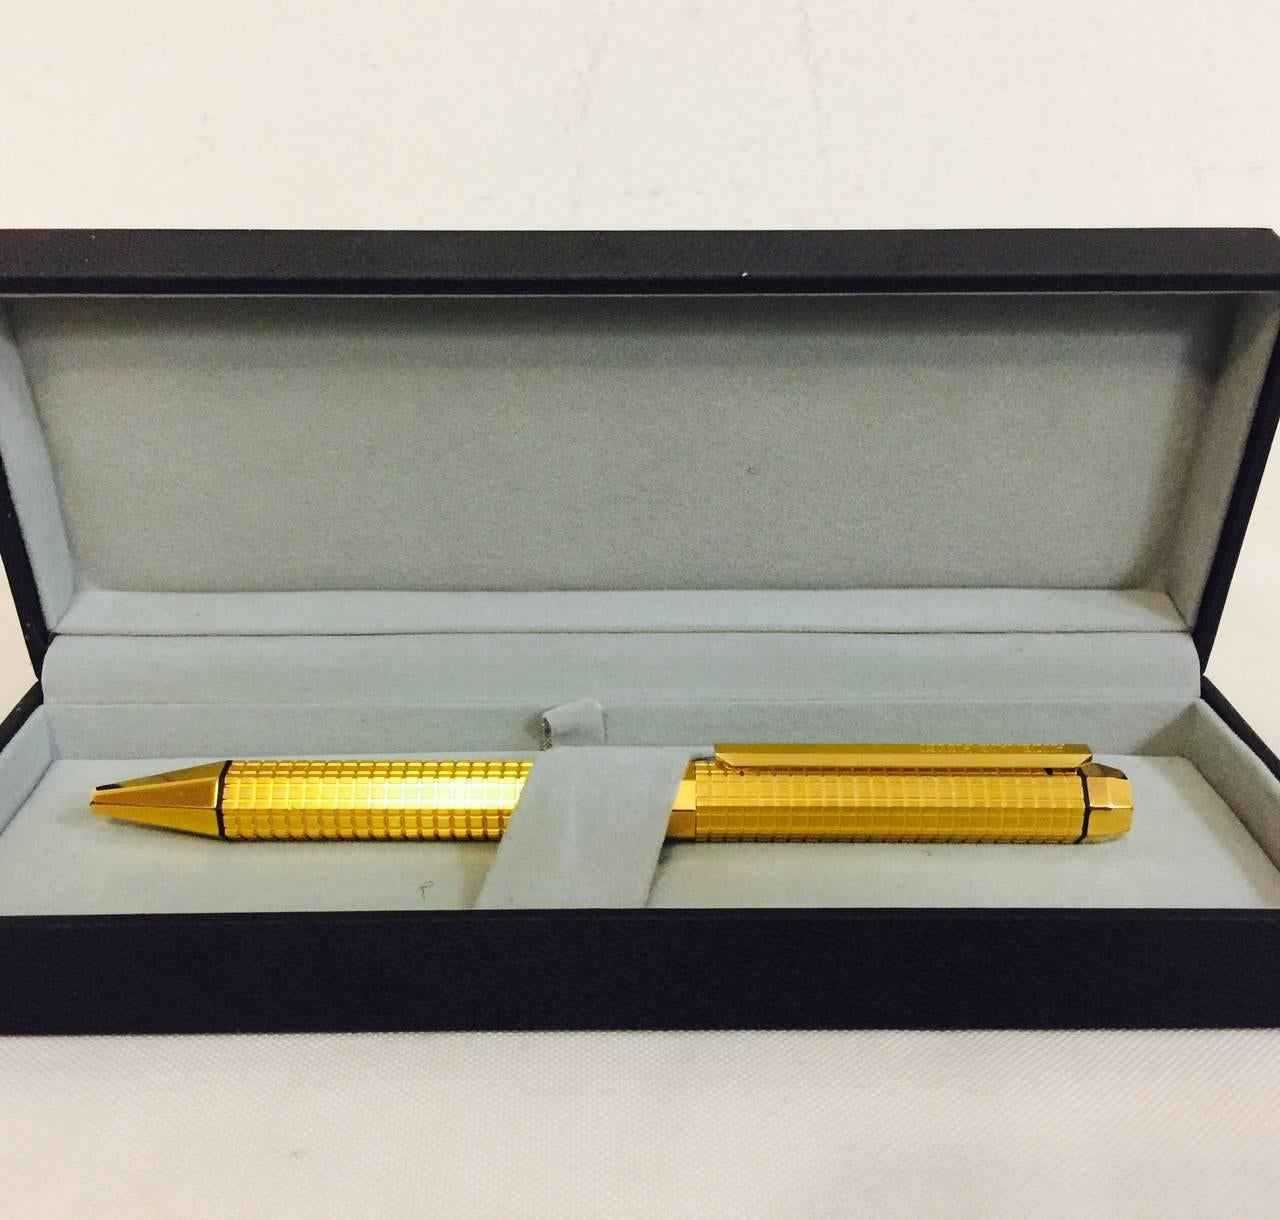 This stunning gold plated pen is not available for purchase from Audemars Piguet, the only way to obtain one is by winning the Audermars Piguet yearly Golf Trophy event played on the best courses, with the best players in the world!  This pen was